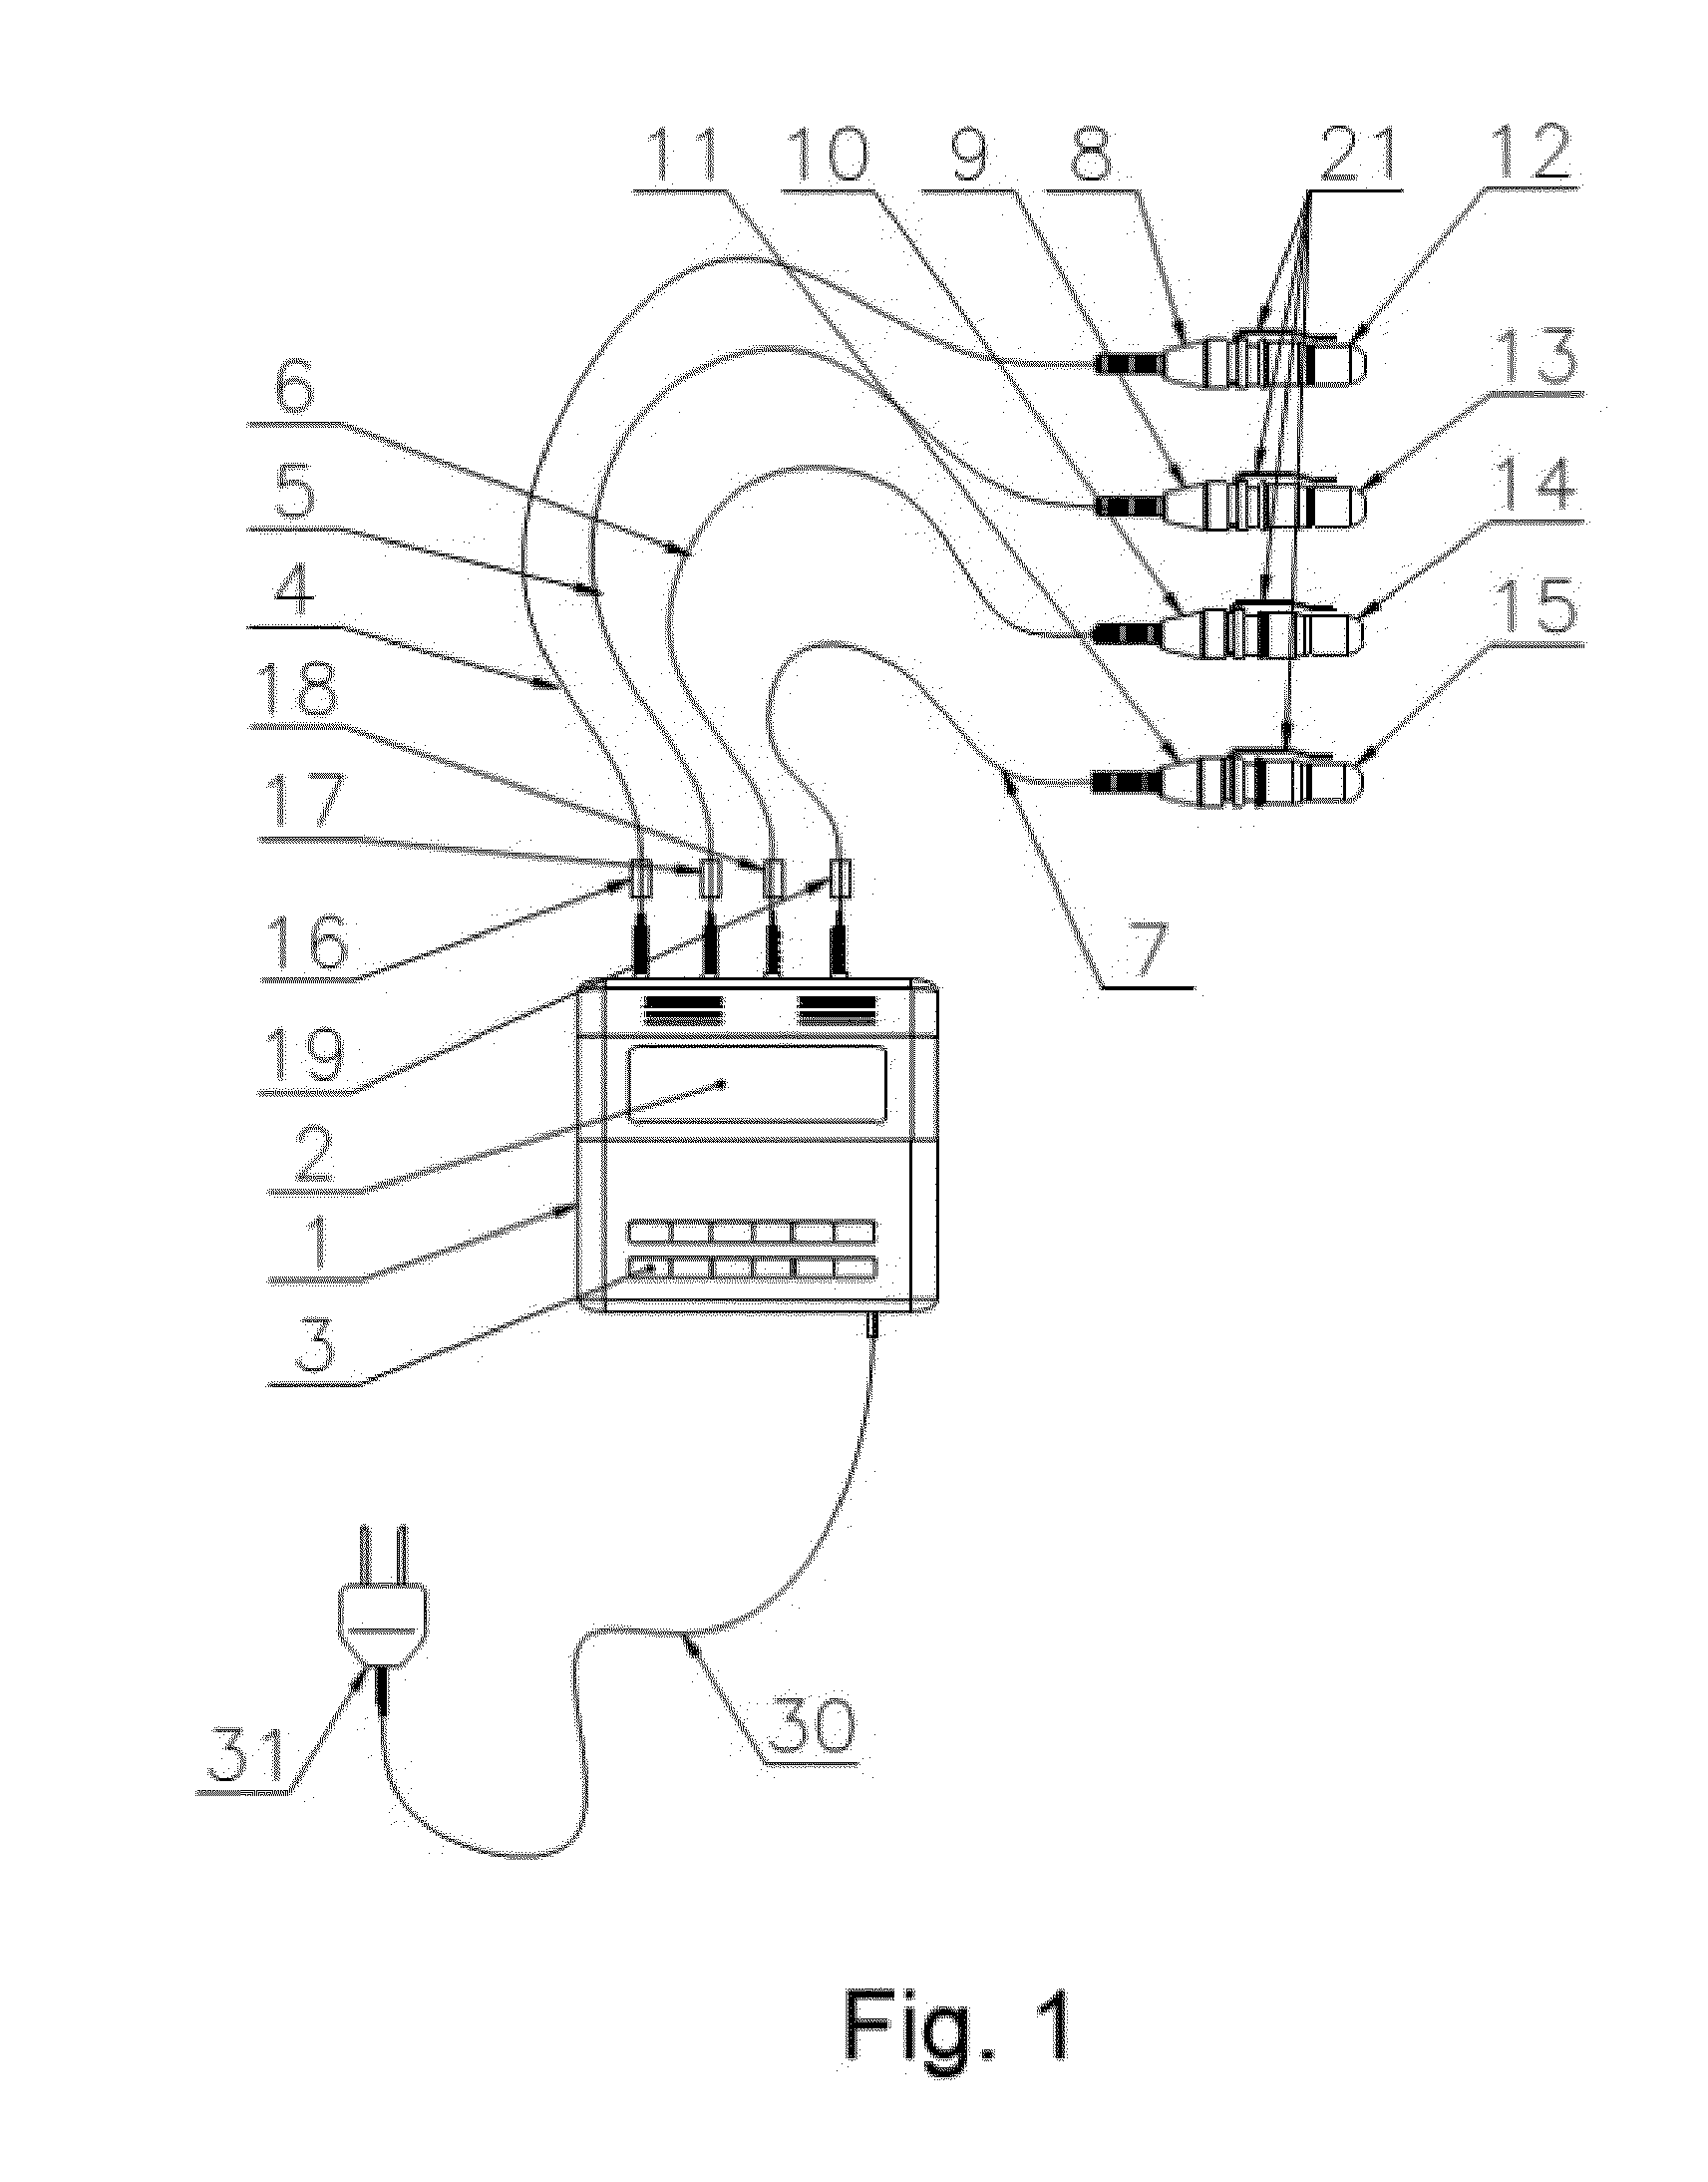 Device for stimulation of the brain by laser circularly or elliptically polarized light